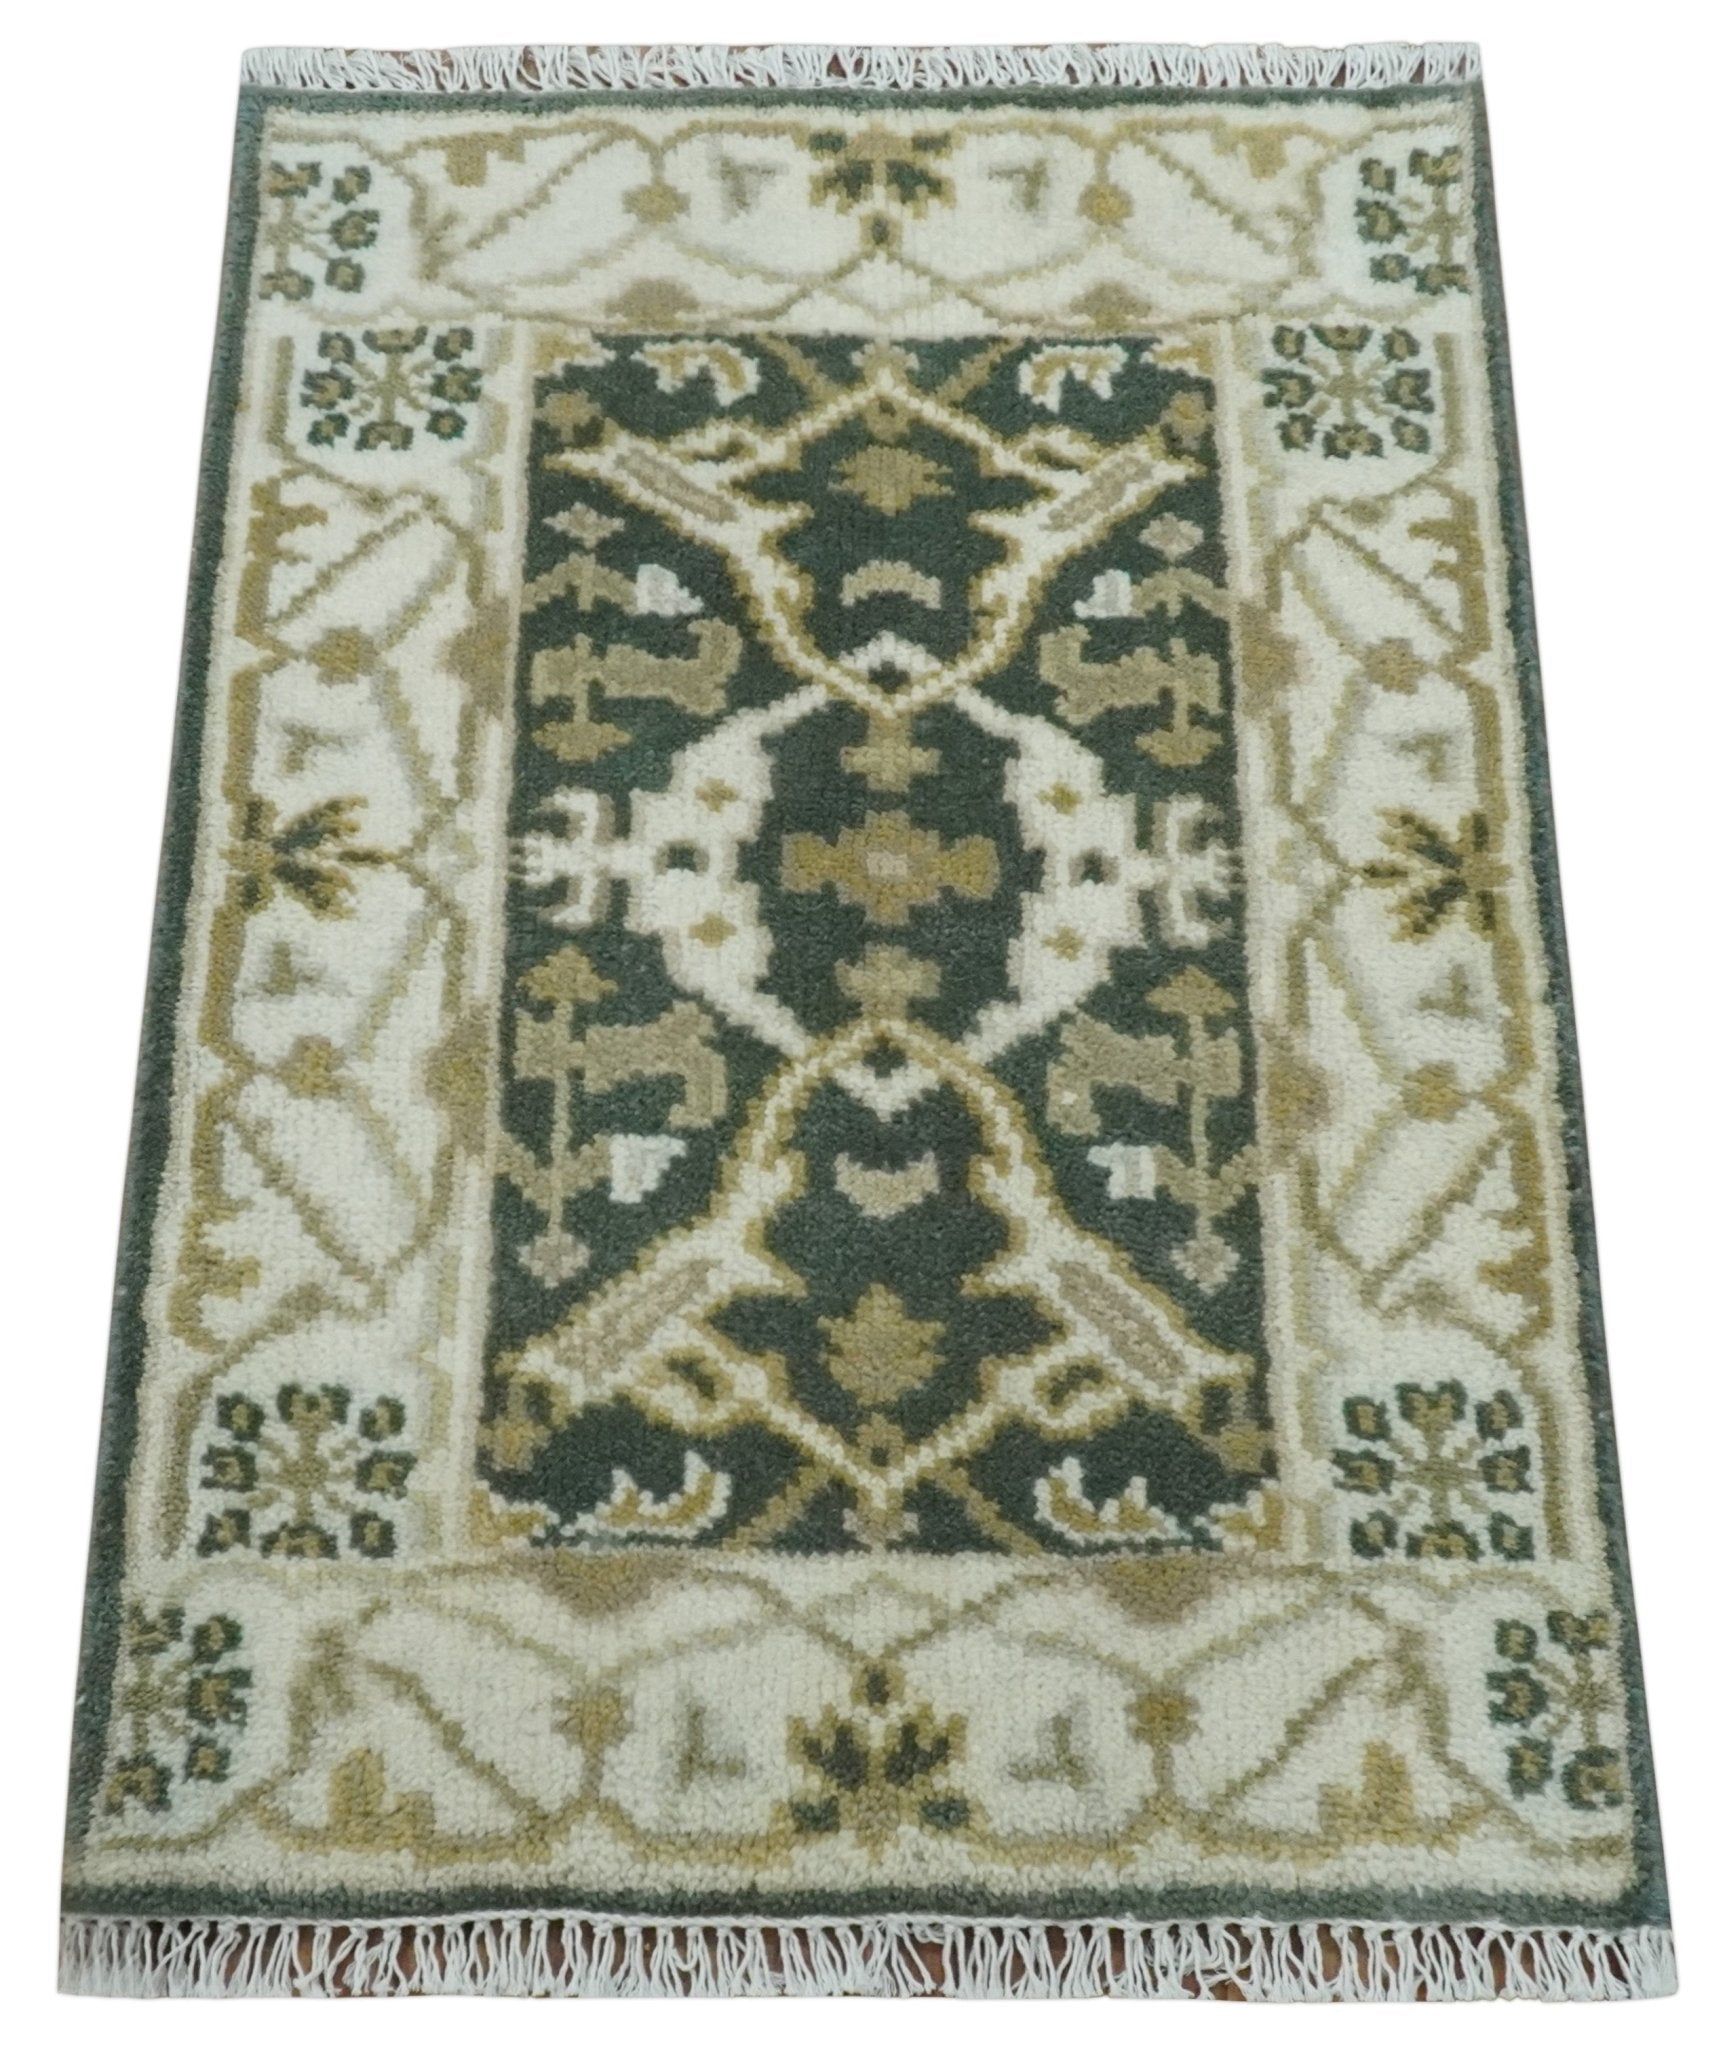 https://therugdecor.com/cdn/shop/products/small-entryway-2x3-gray-ivory-and-beige-hand-knotted-oriental-oushak-wool-area-rug-233276.jpg?v=1685263005